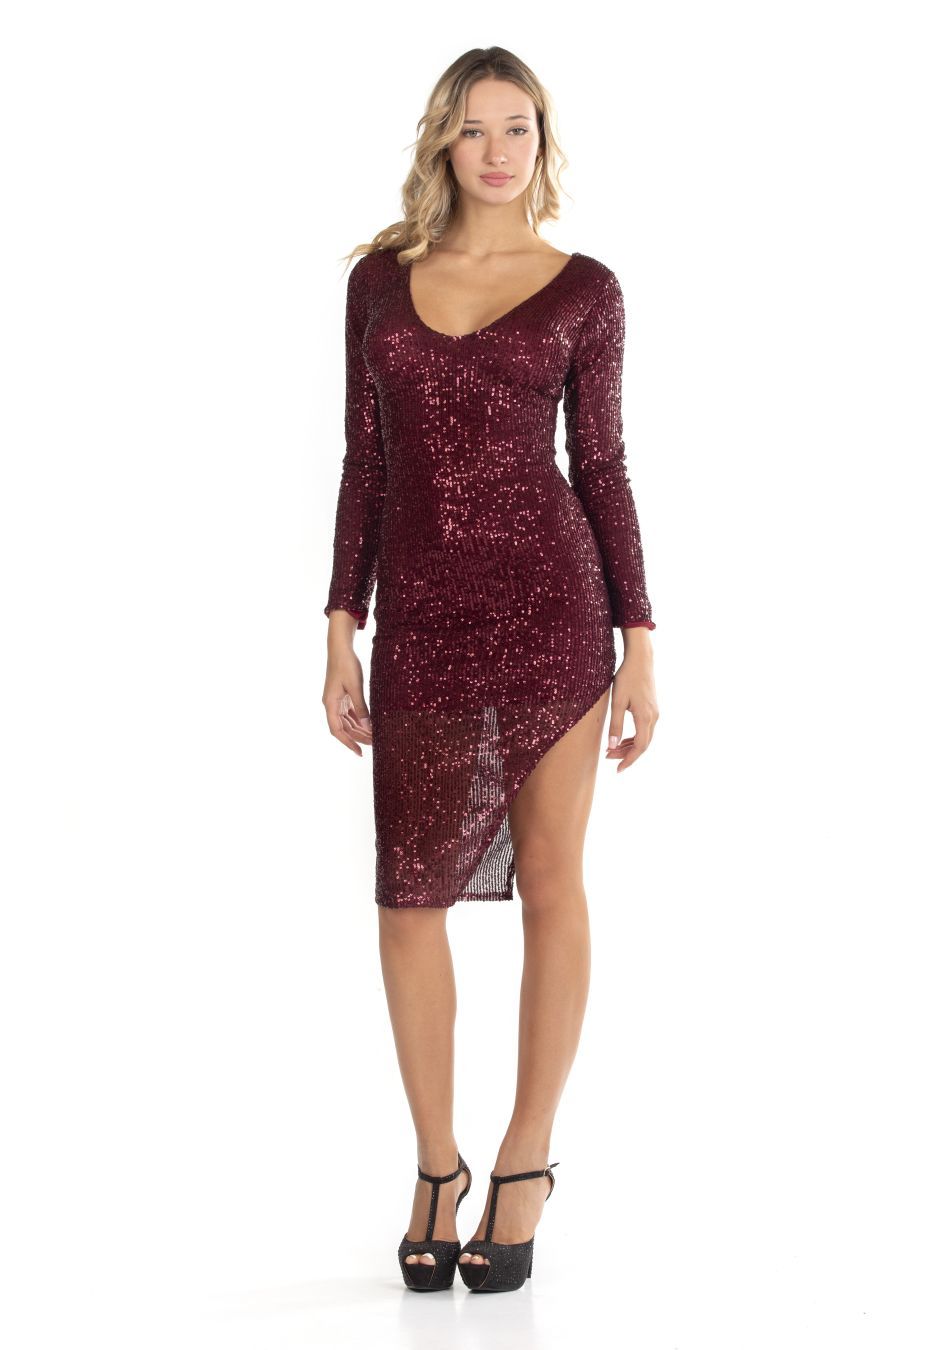 Sequin dress with a split